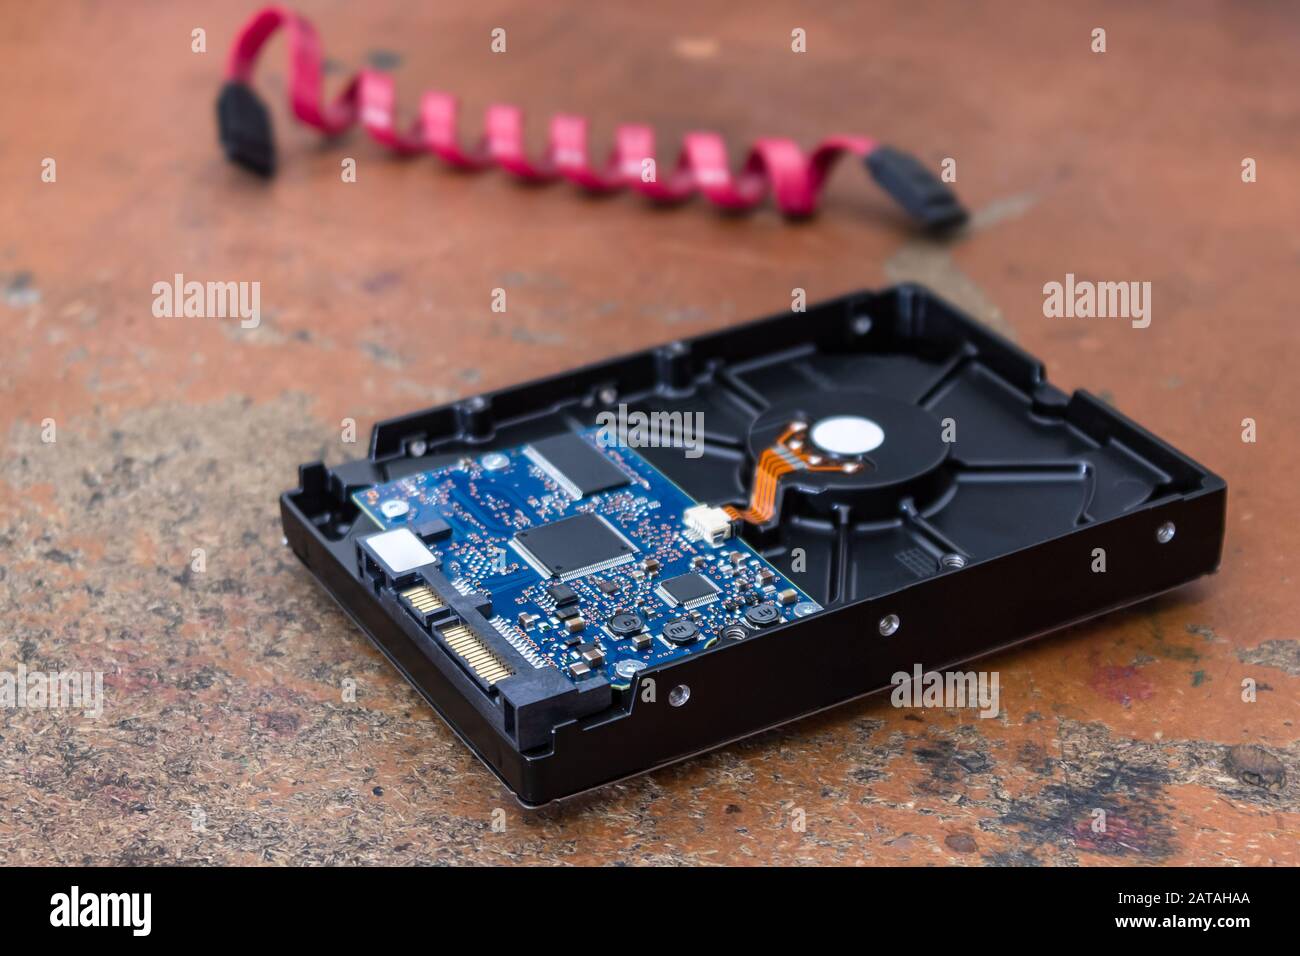 Computer hard drive lies on a table in an electronics repair shop Stock Photo